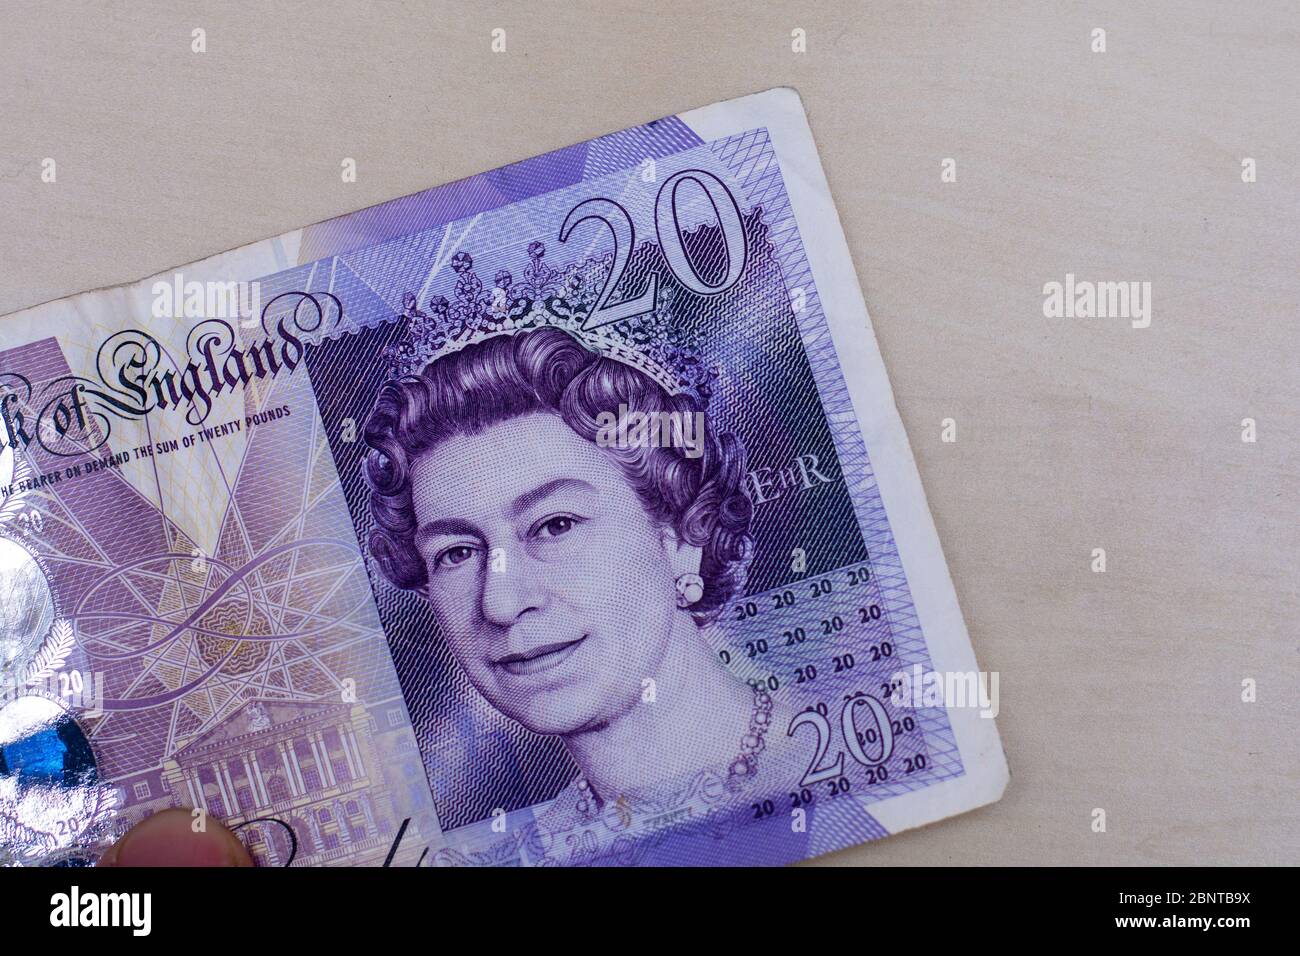 Persons hand giving the Currency of the England in the United Kingdom - One purple twenty pound note spread out on a white background. Money exchange. Stock Photo